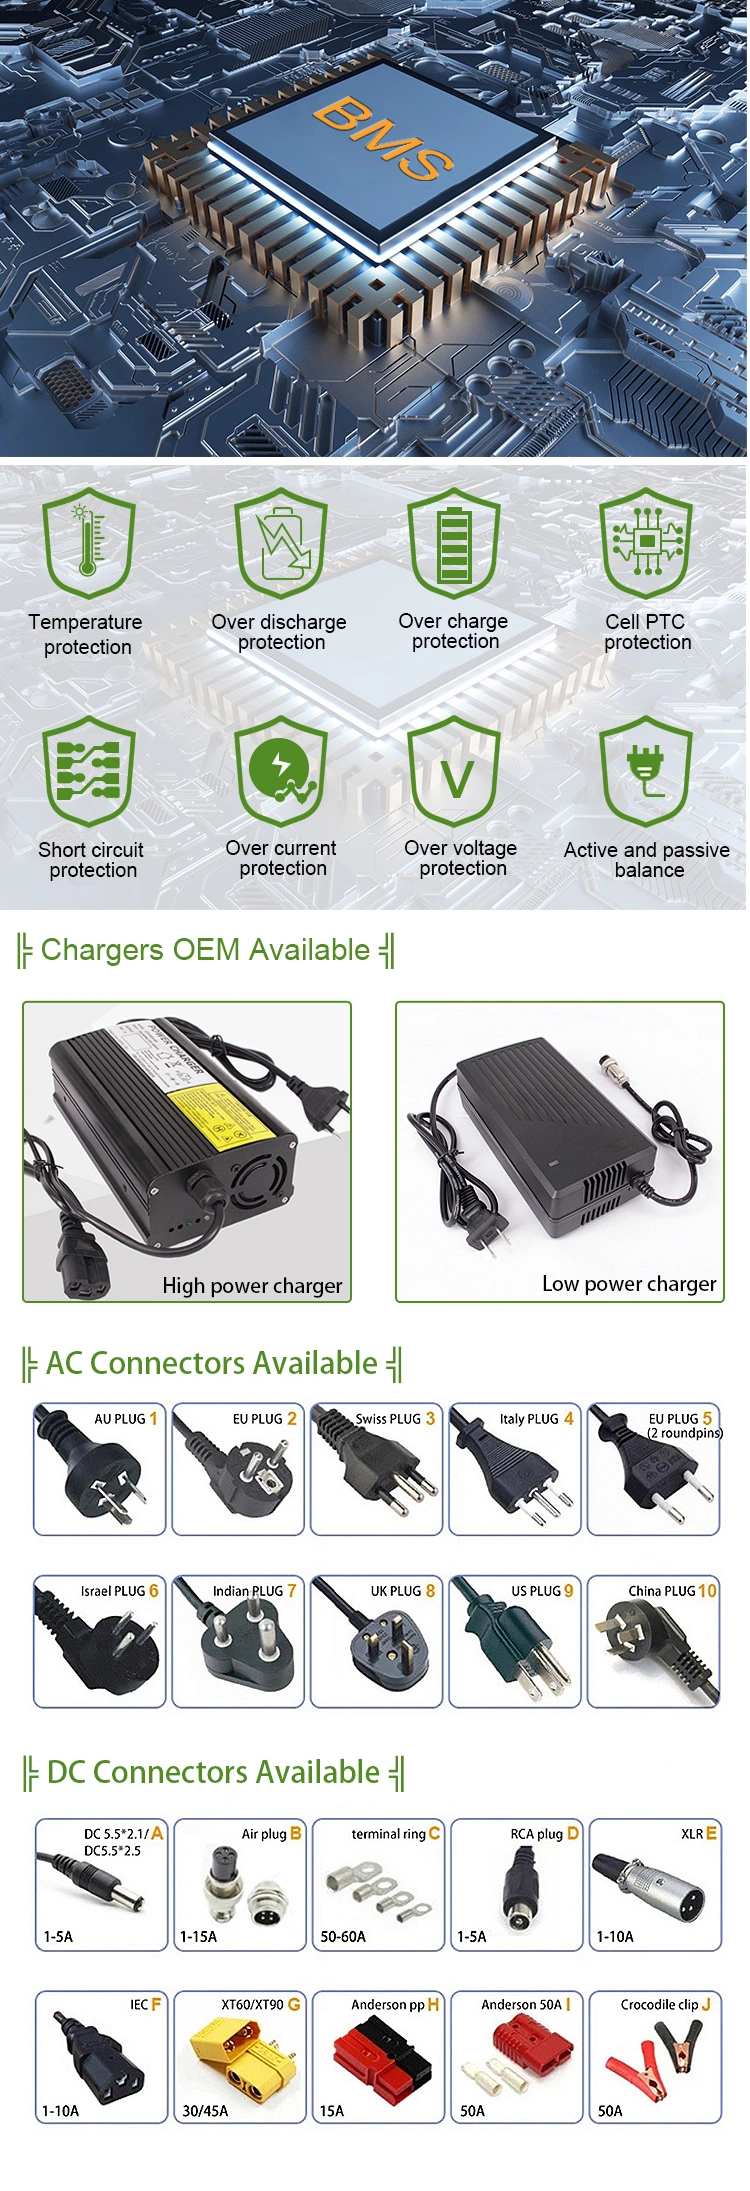 China Manufacturing 72V Battery 3000W High Quality Lithium Battery with Charger for Motorcycle Ebike Scooter 48V 50ah 30ah